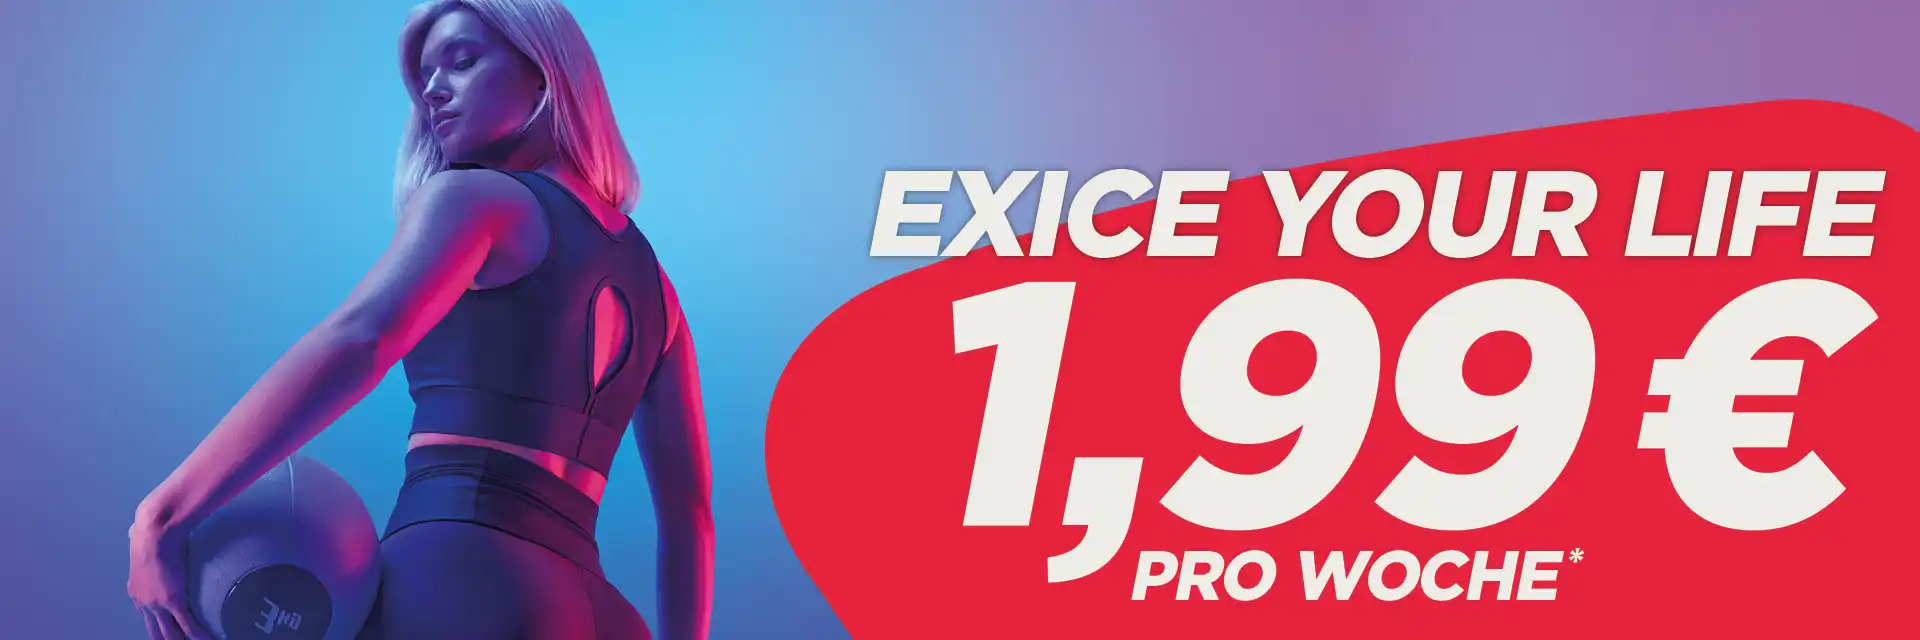 EXICE YOUR LIFE - 1,99€ pro Woche